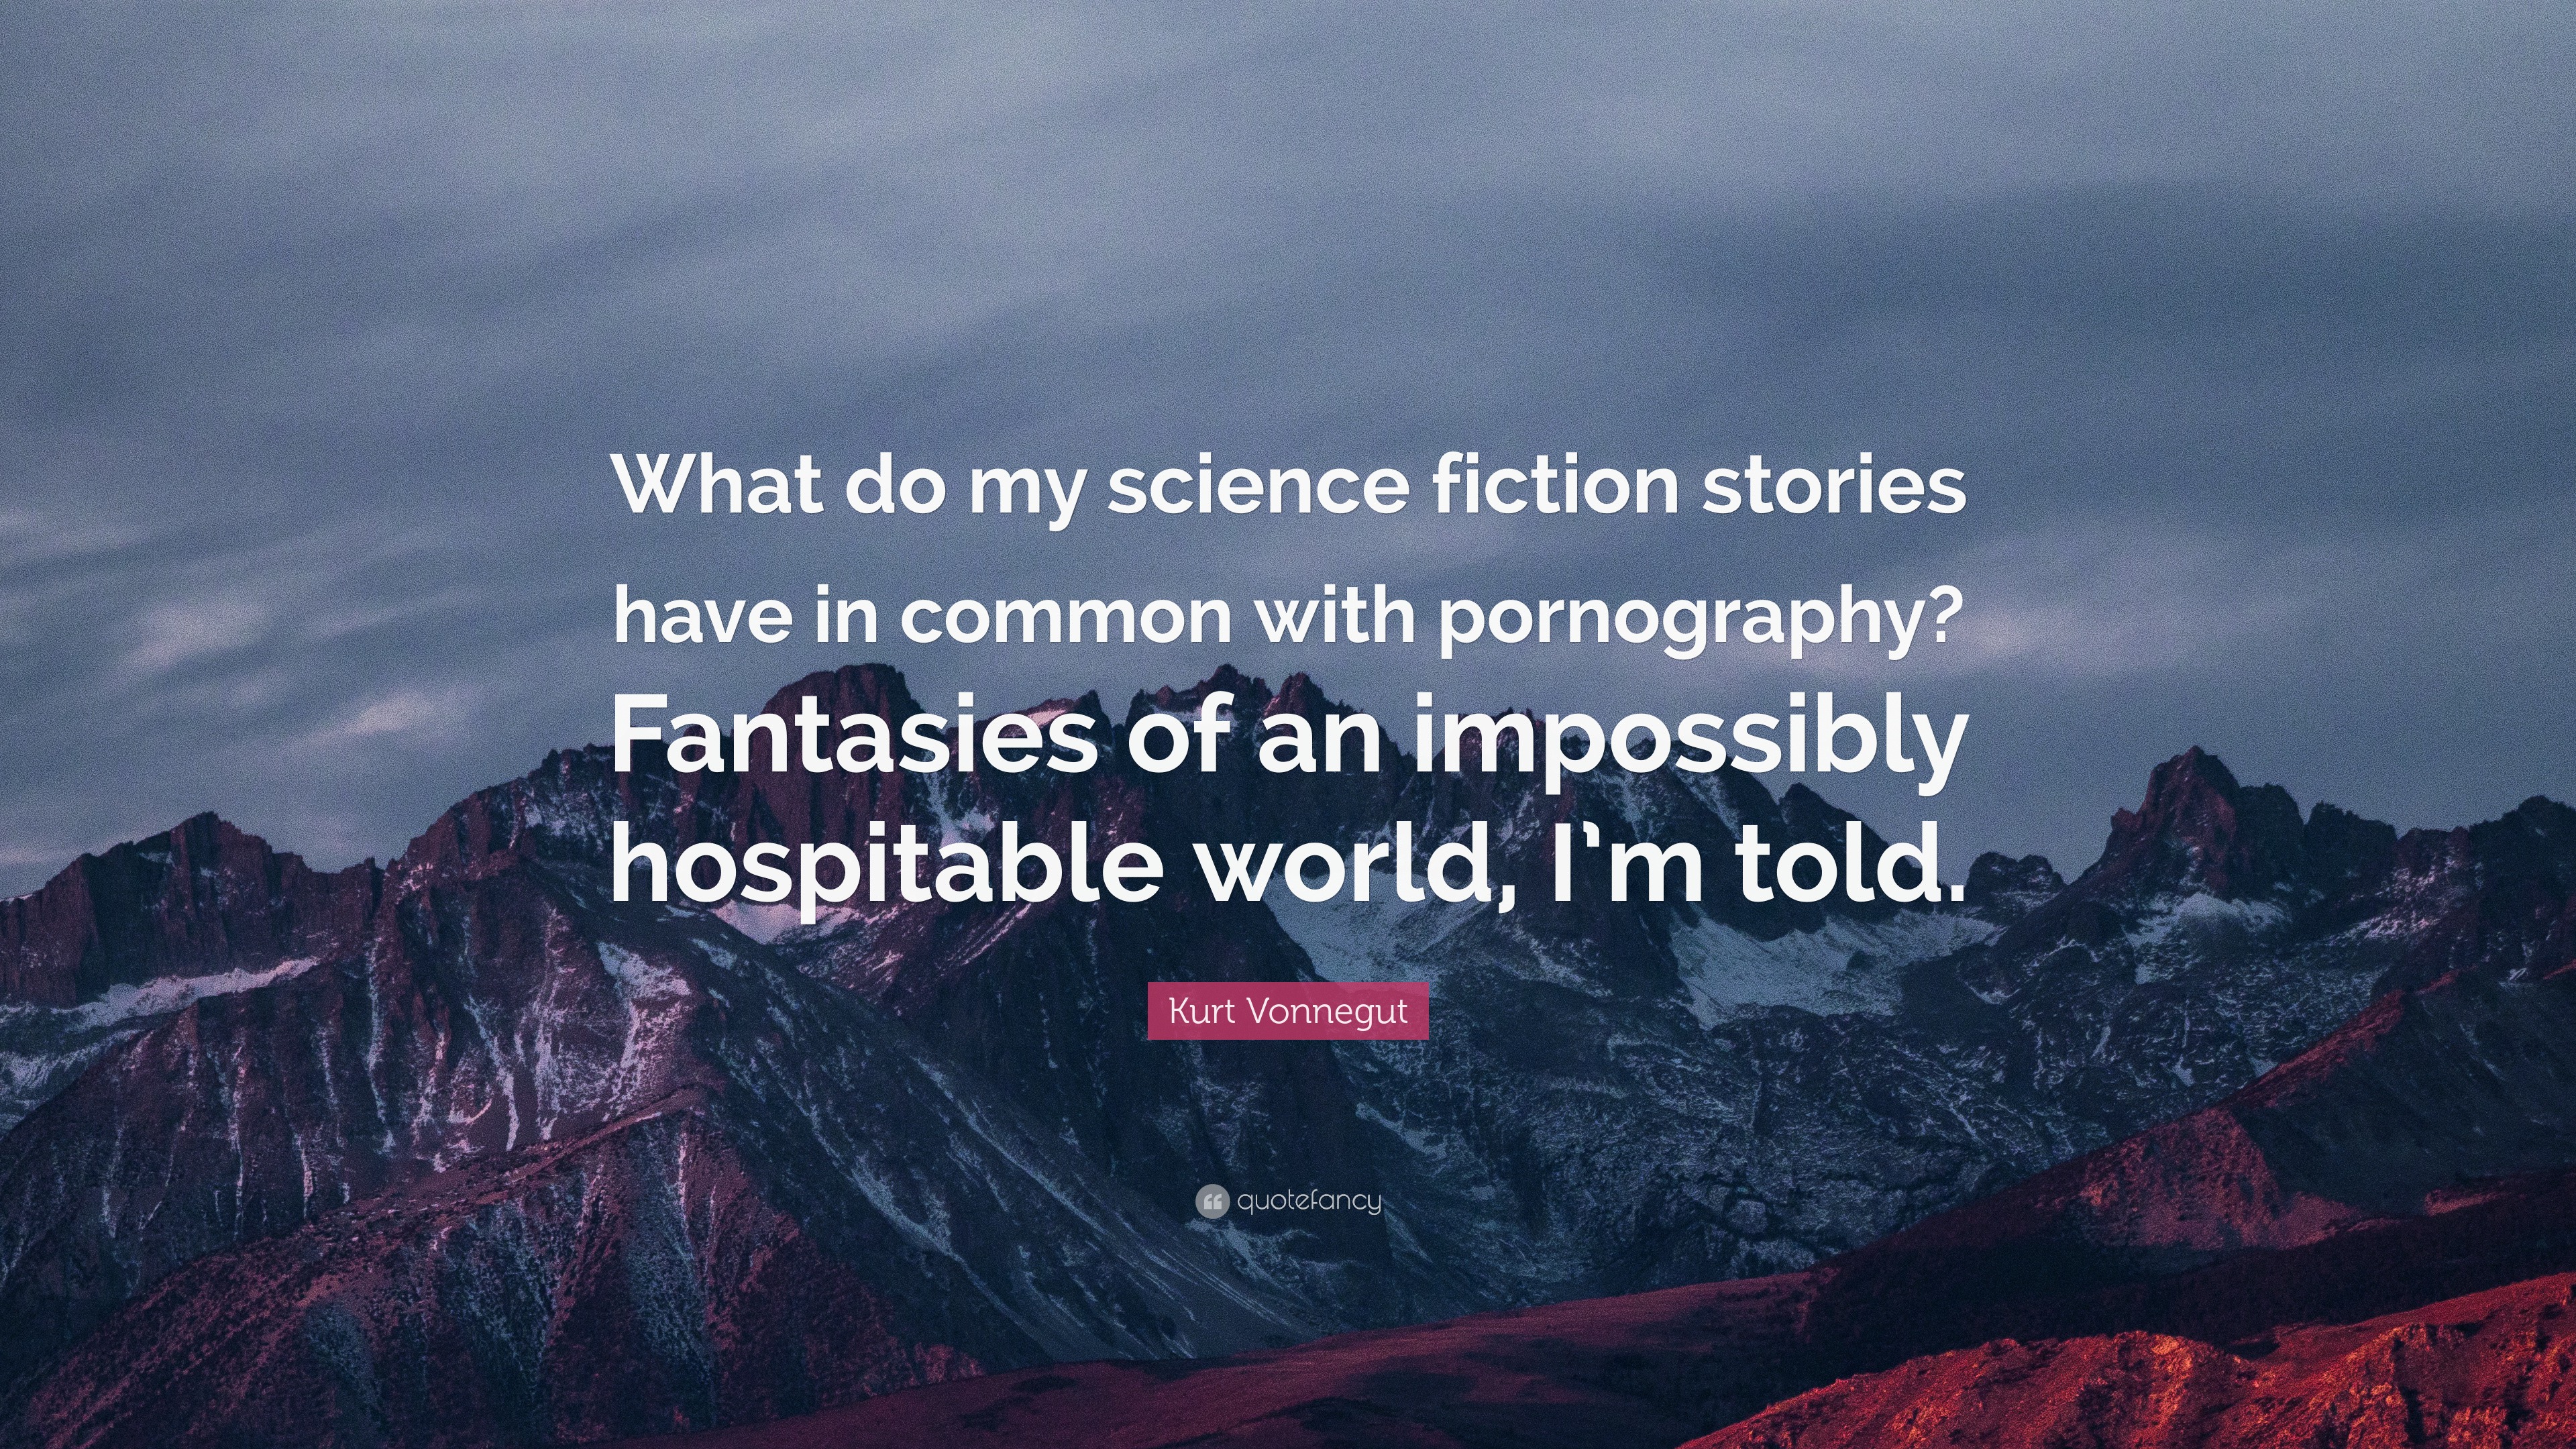 Kurt Vonnegut Quote: â€œWhat do my science fiction stories have in common  with pornography? Fantasies of an impossibly hospitable world, I'm tol...â€